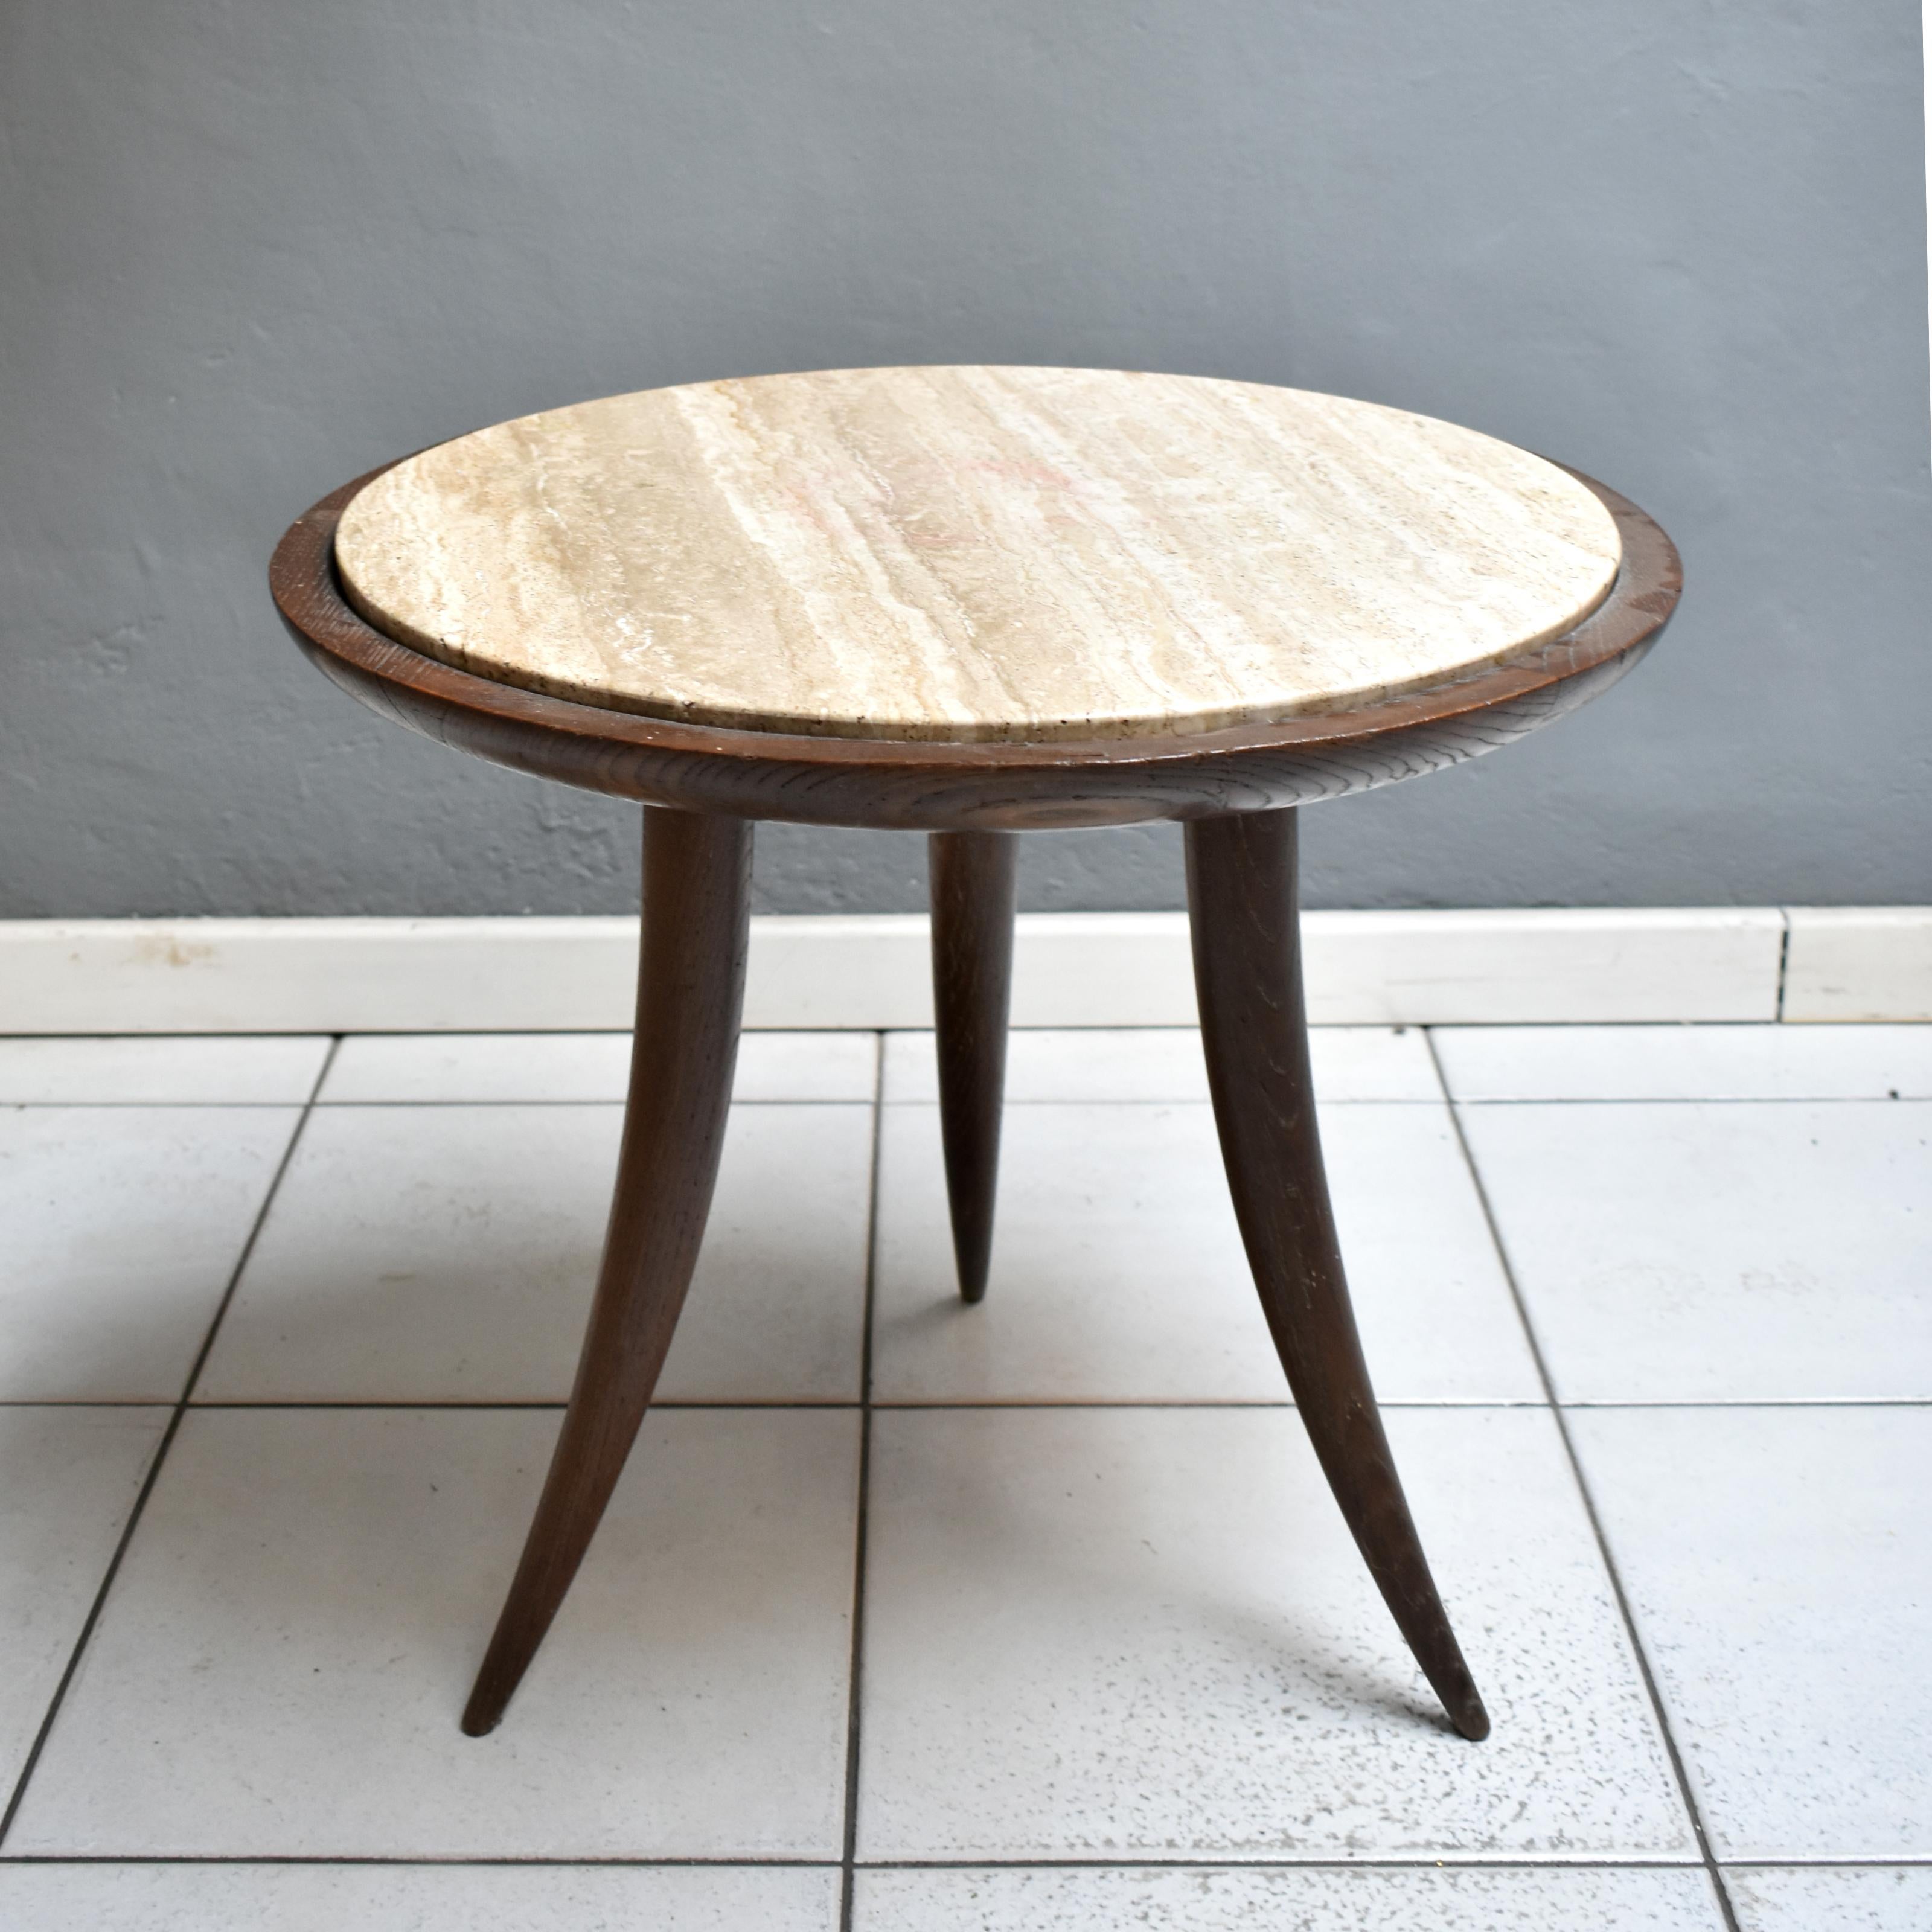 Mid-Century Modern 1950s Italian Round Coffee Table in Wood and Travertine Marble Top For Sale